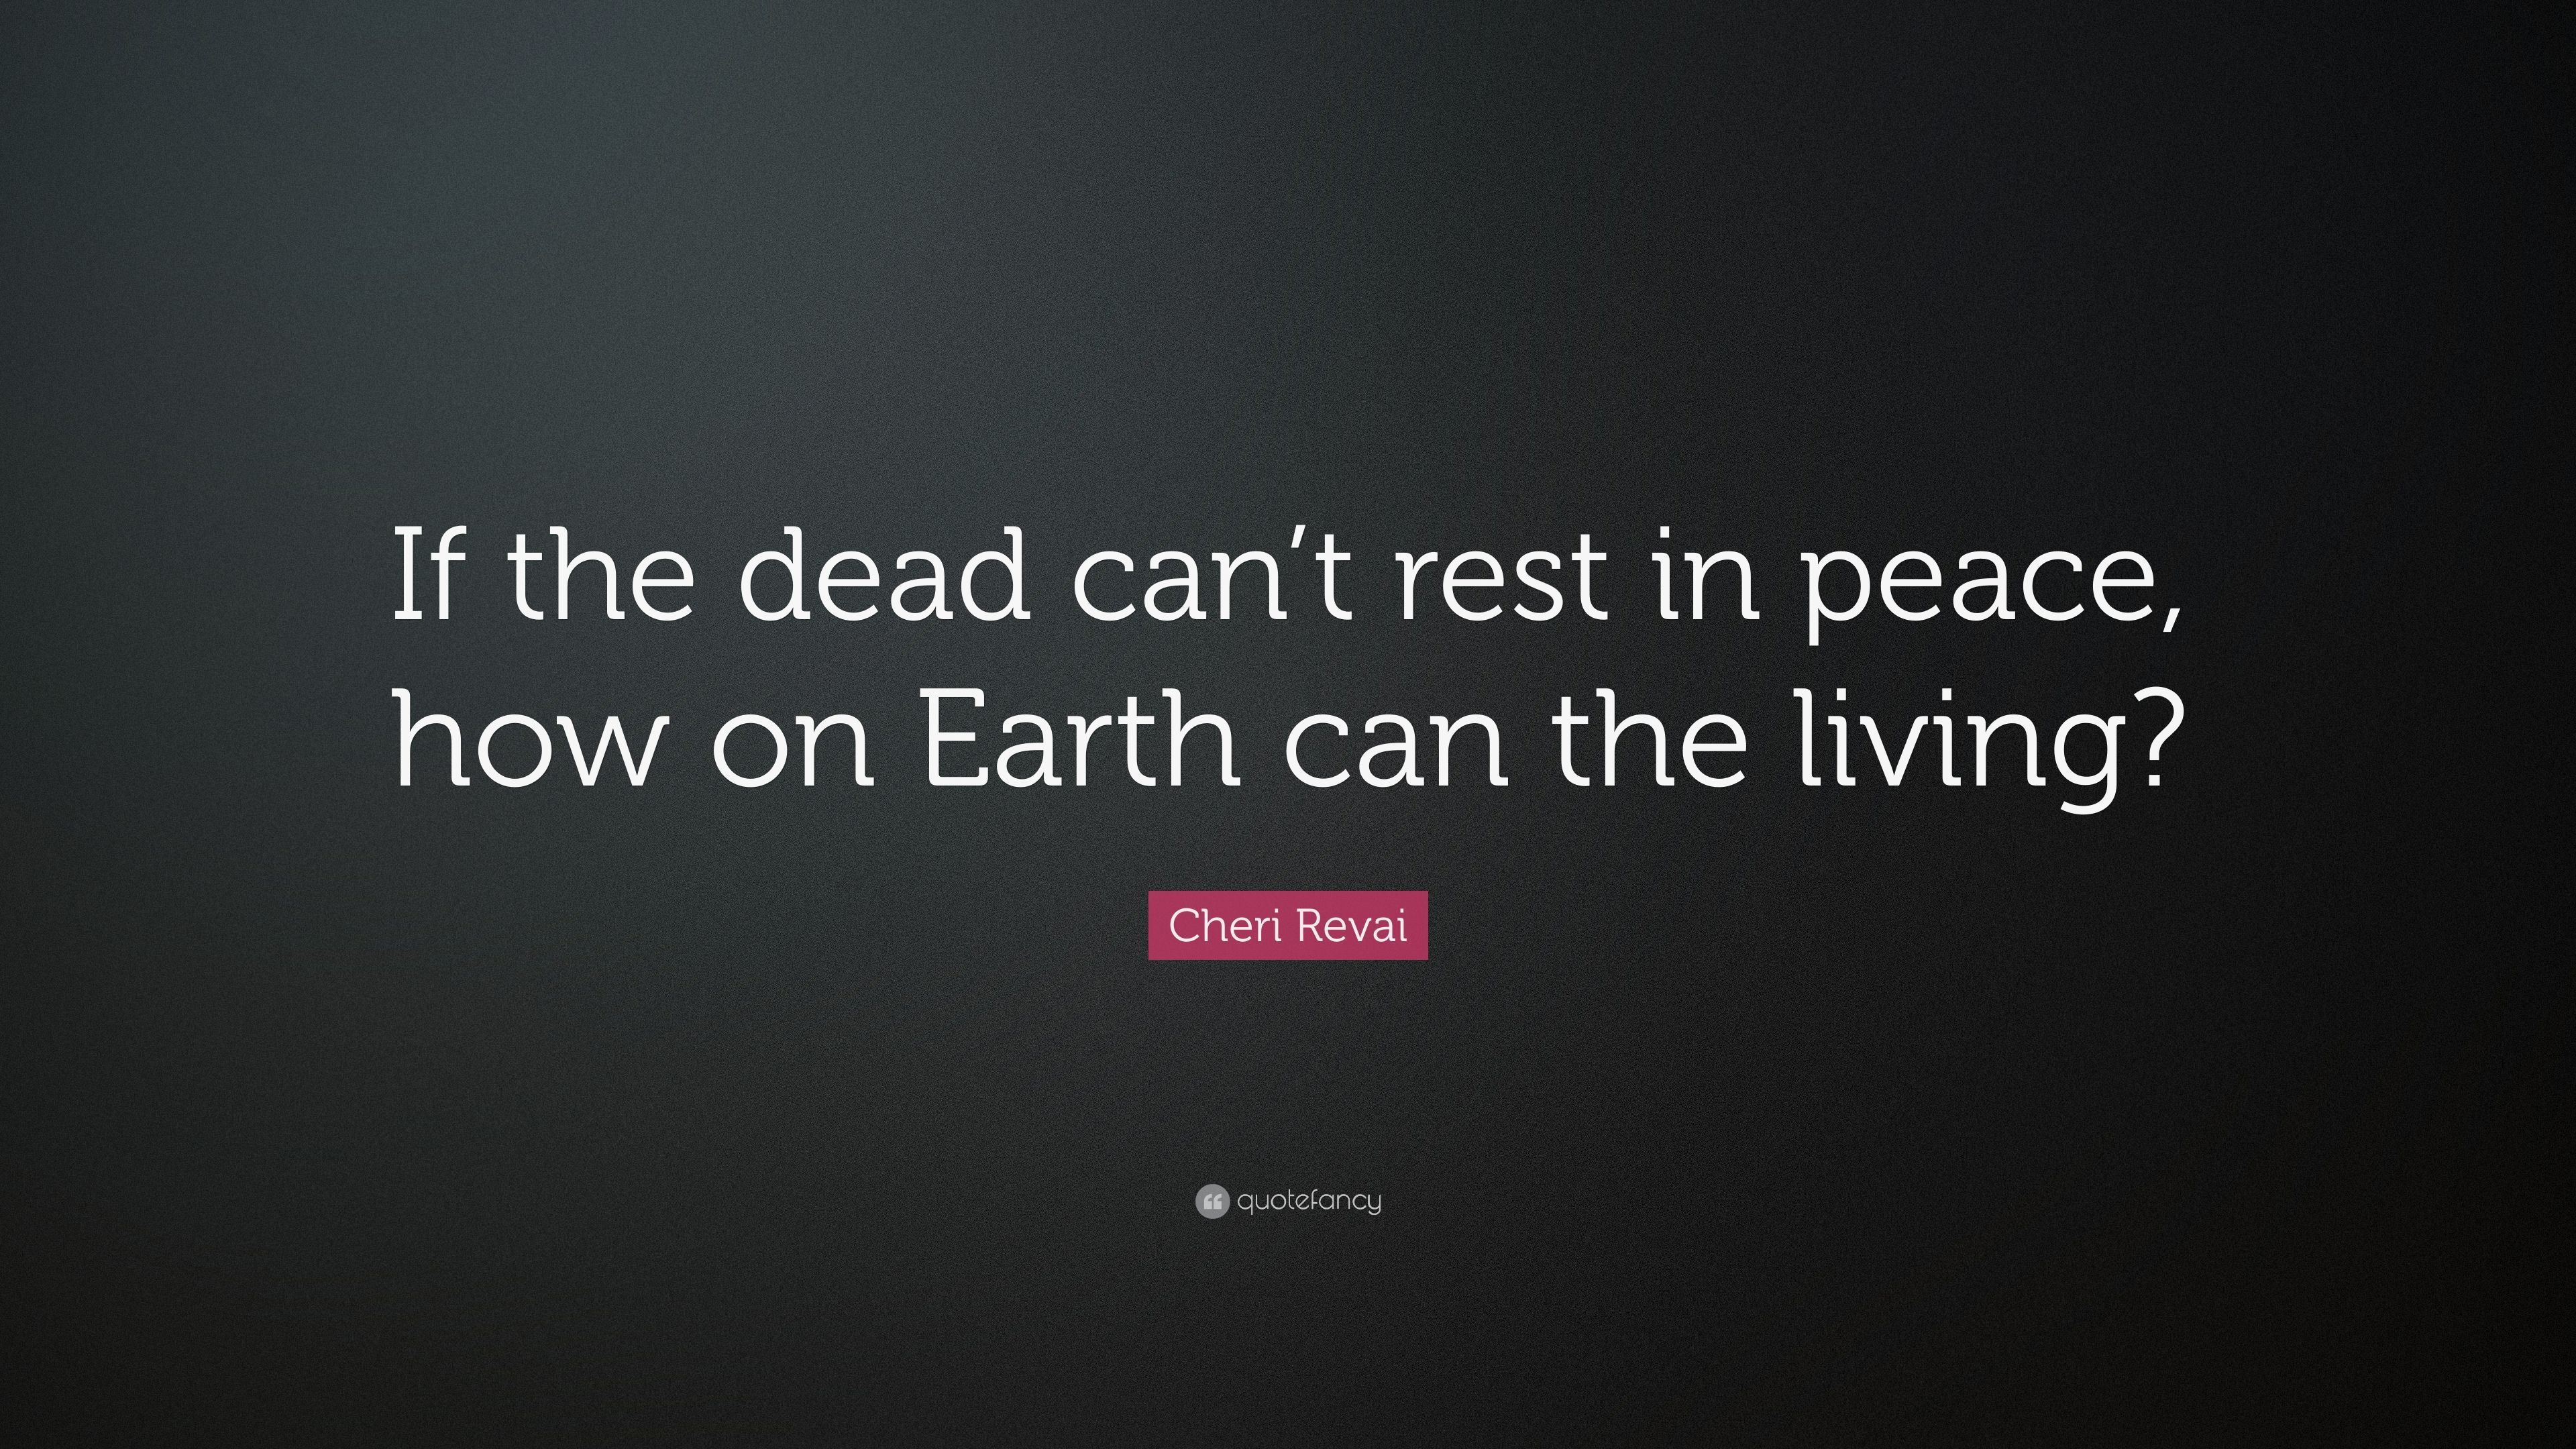 Cheri Revai Quote: “If the dead can't rest in peace, how on Earth